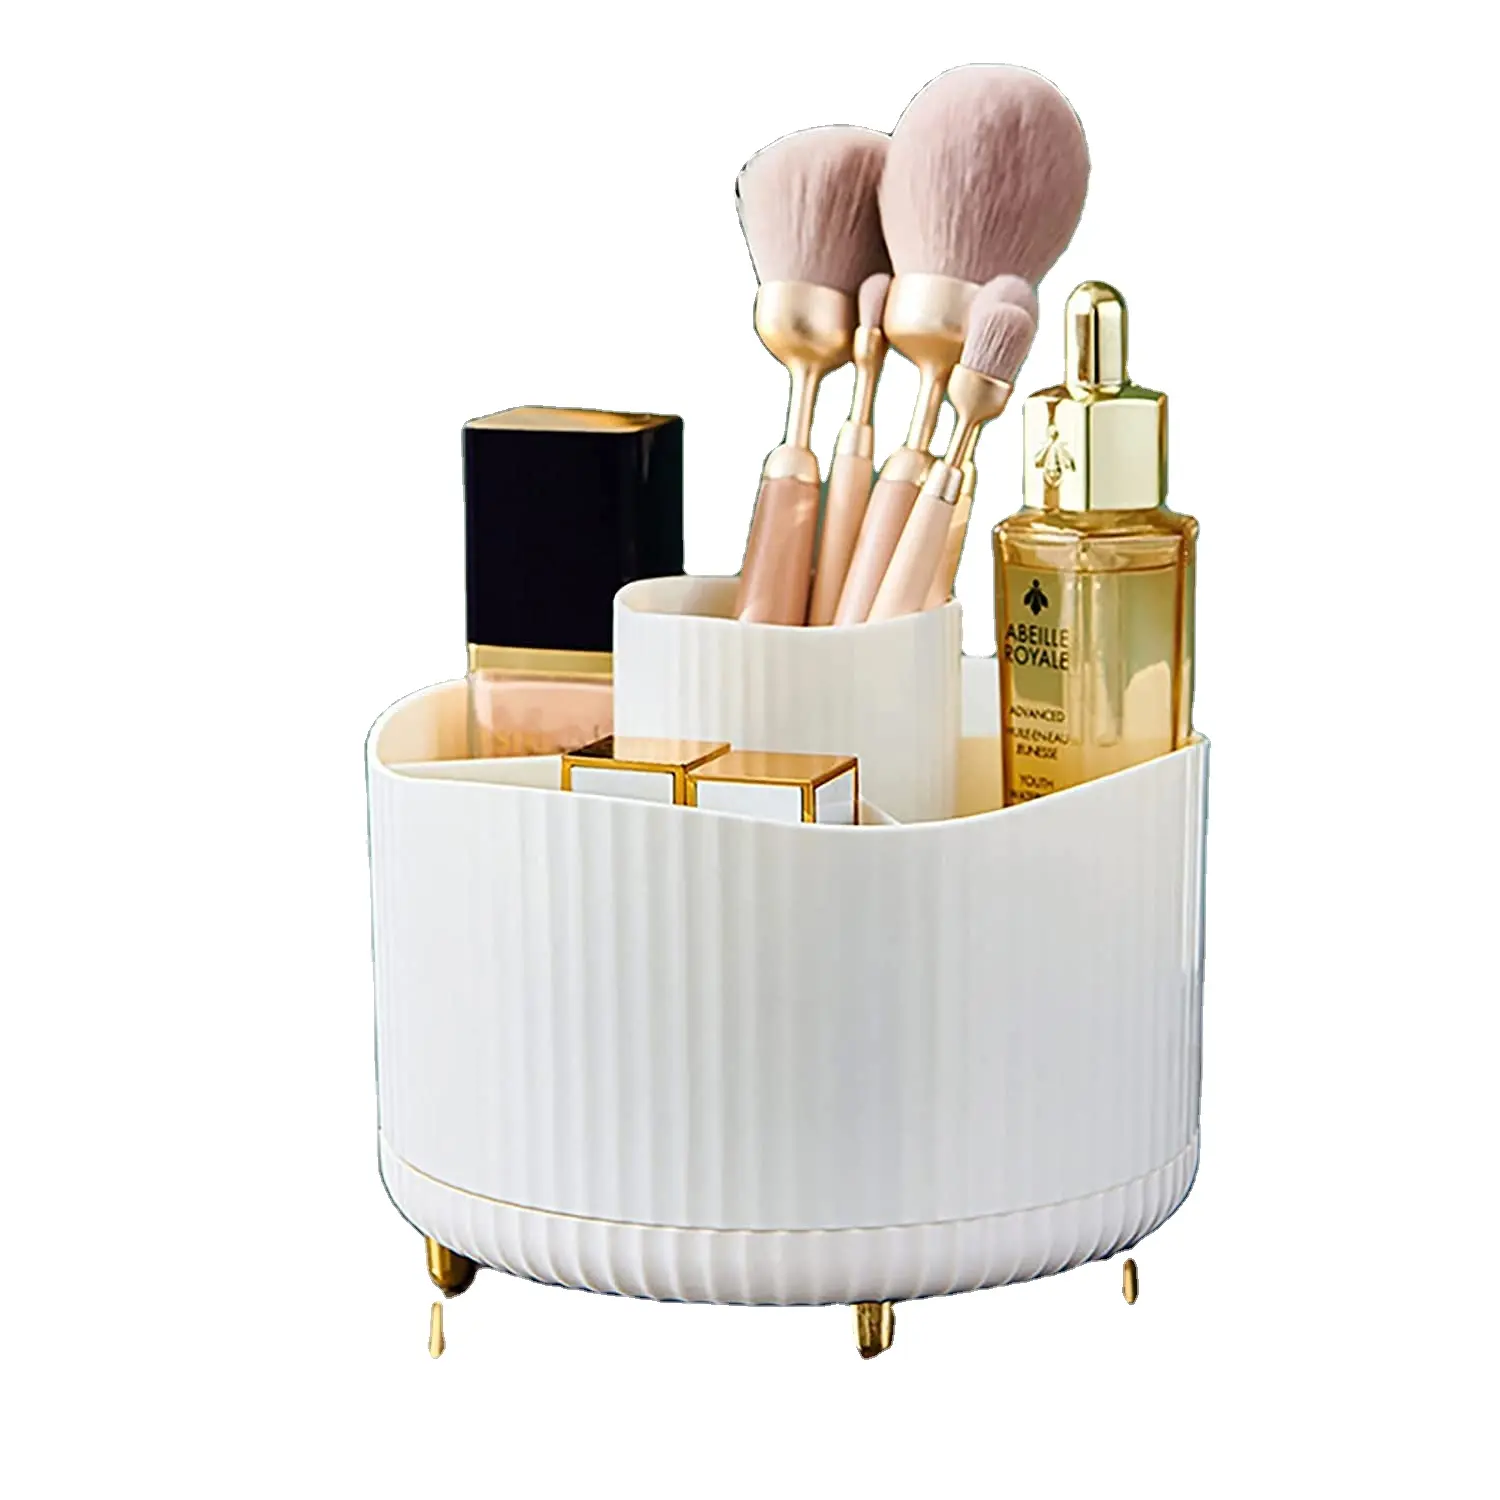 Rotating Makeup Brush Holder Cosmetic Brushes Organizer with 5 slots for for Cosmetics, Bathroom